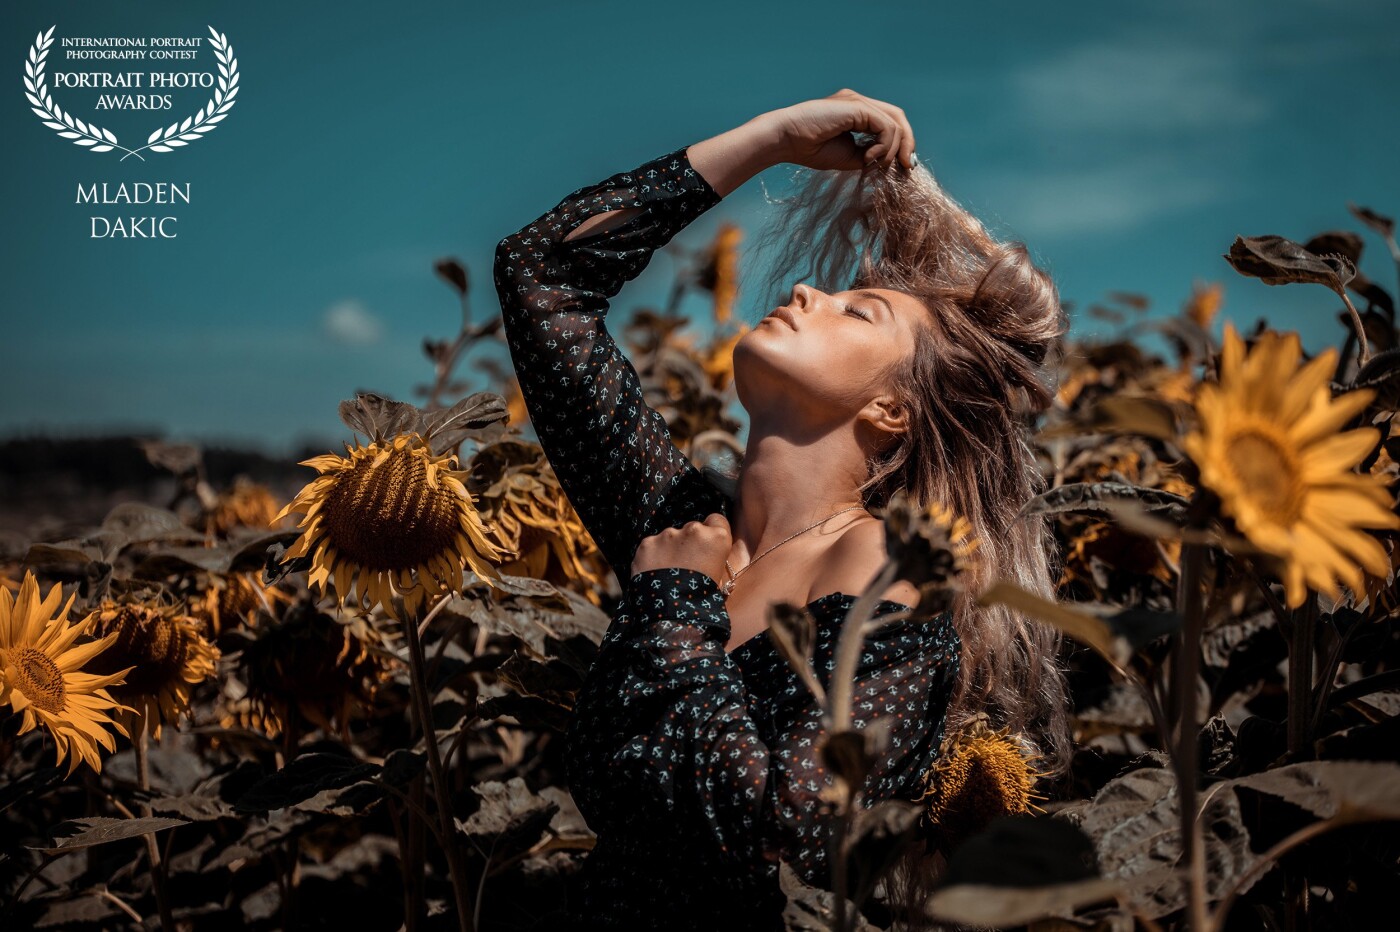 This picture is one of several photos of my model Jana in a sunflower field. That's why I named it "between the Sunflowers". I like this picture very much, it's absolutely stunning and an advertisement for summer time.<br />
<br />
I used natural light only.